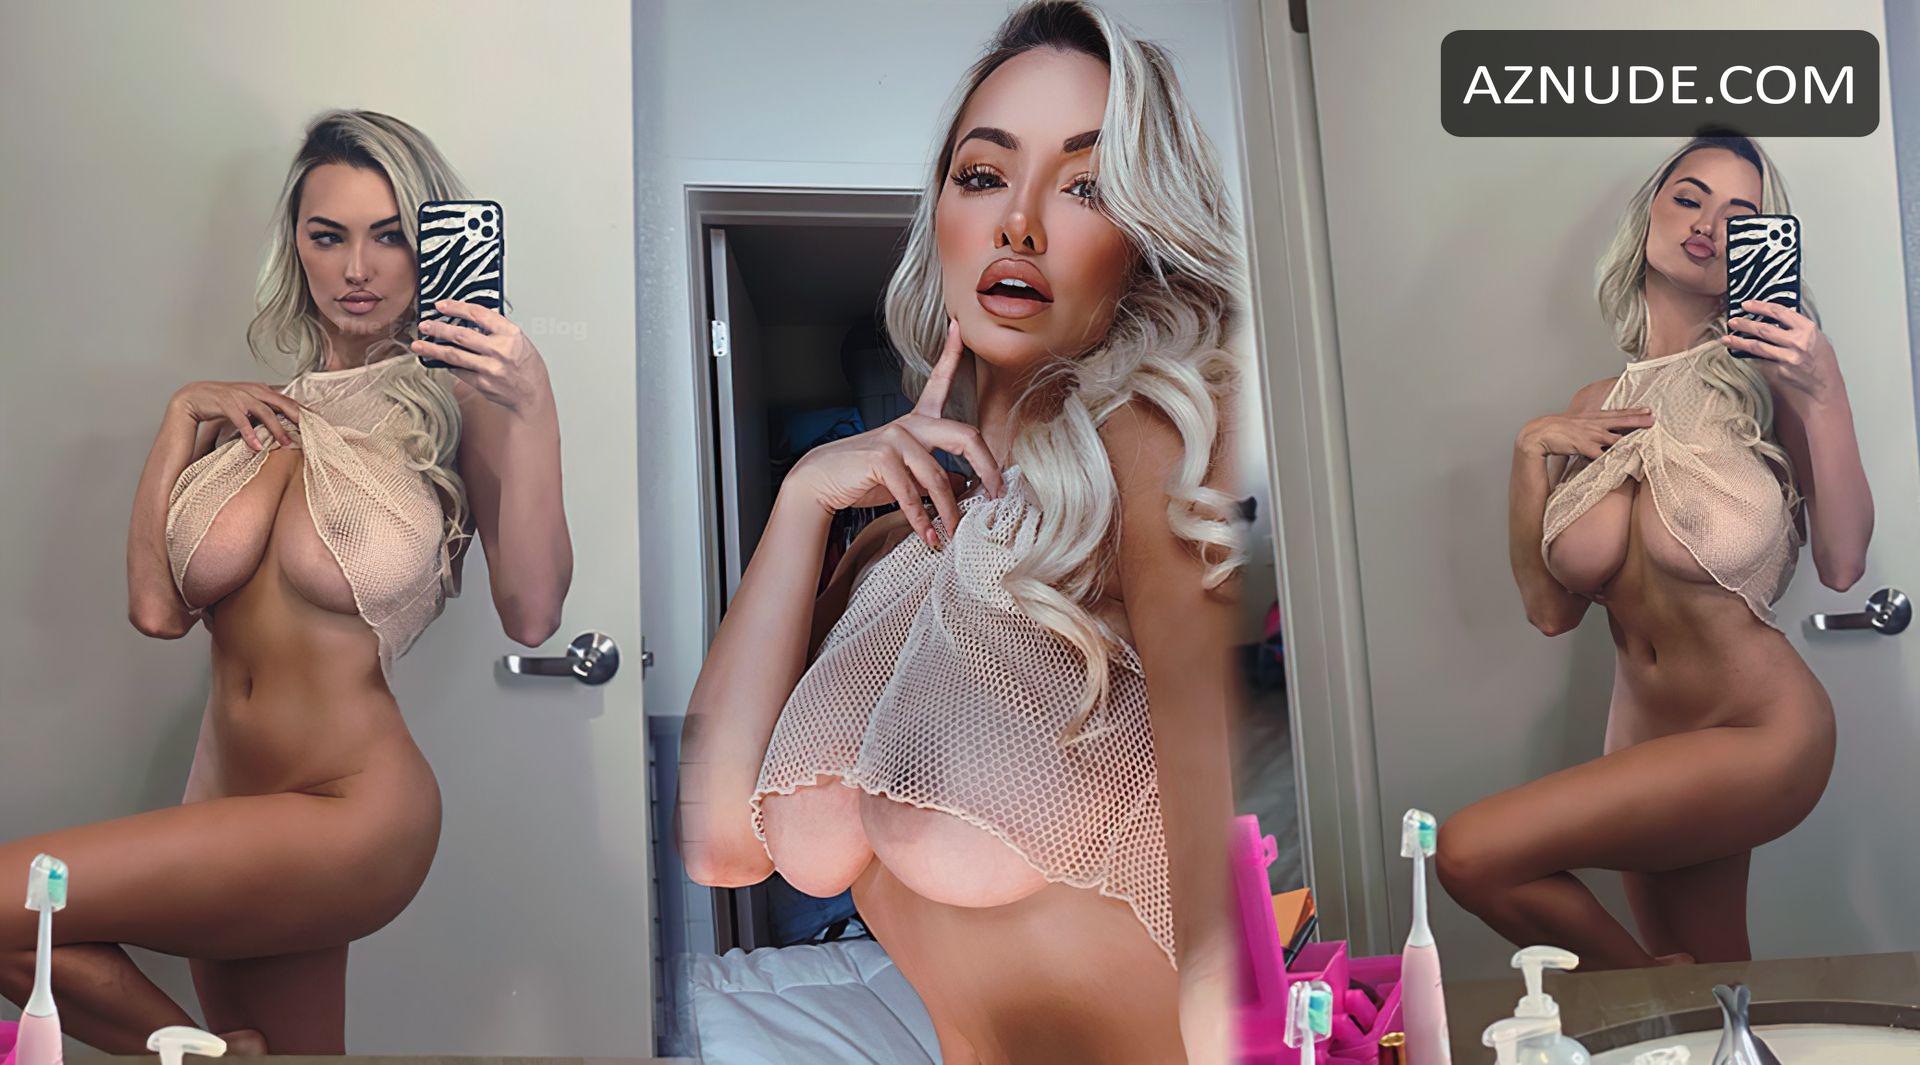 Lindsey pelas nude pictures